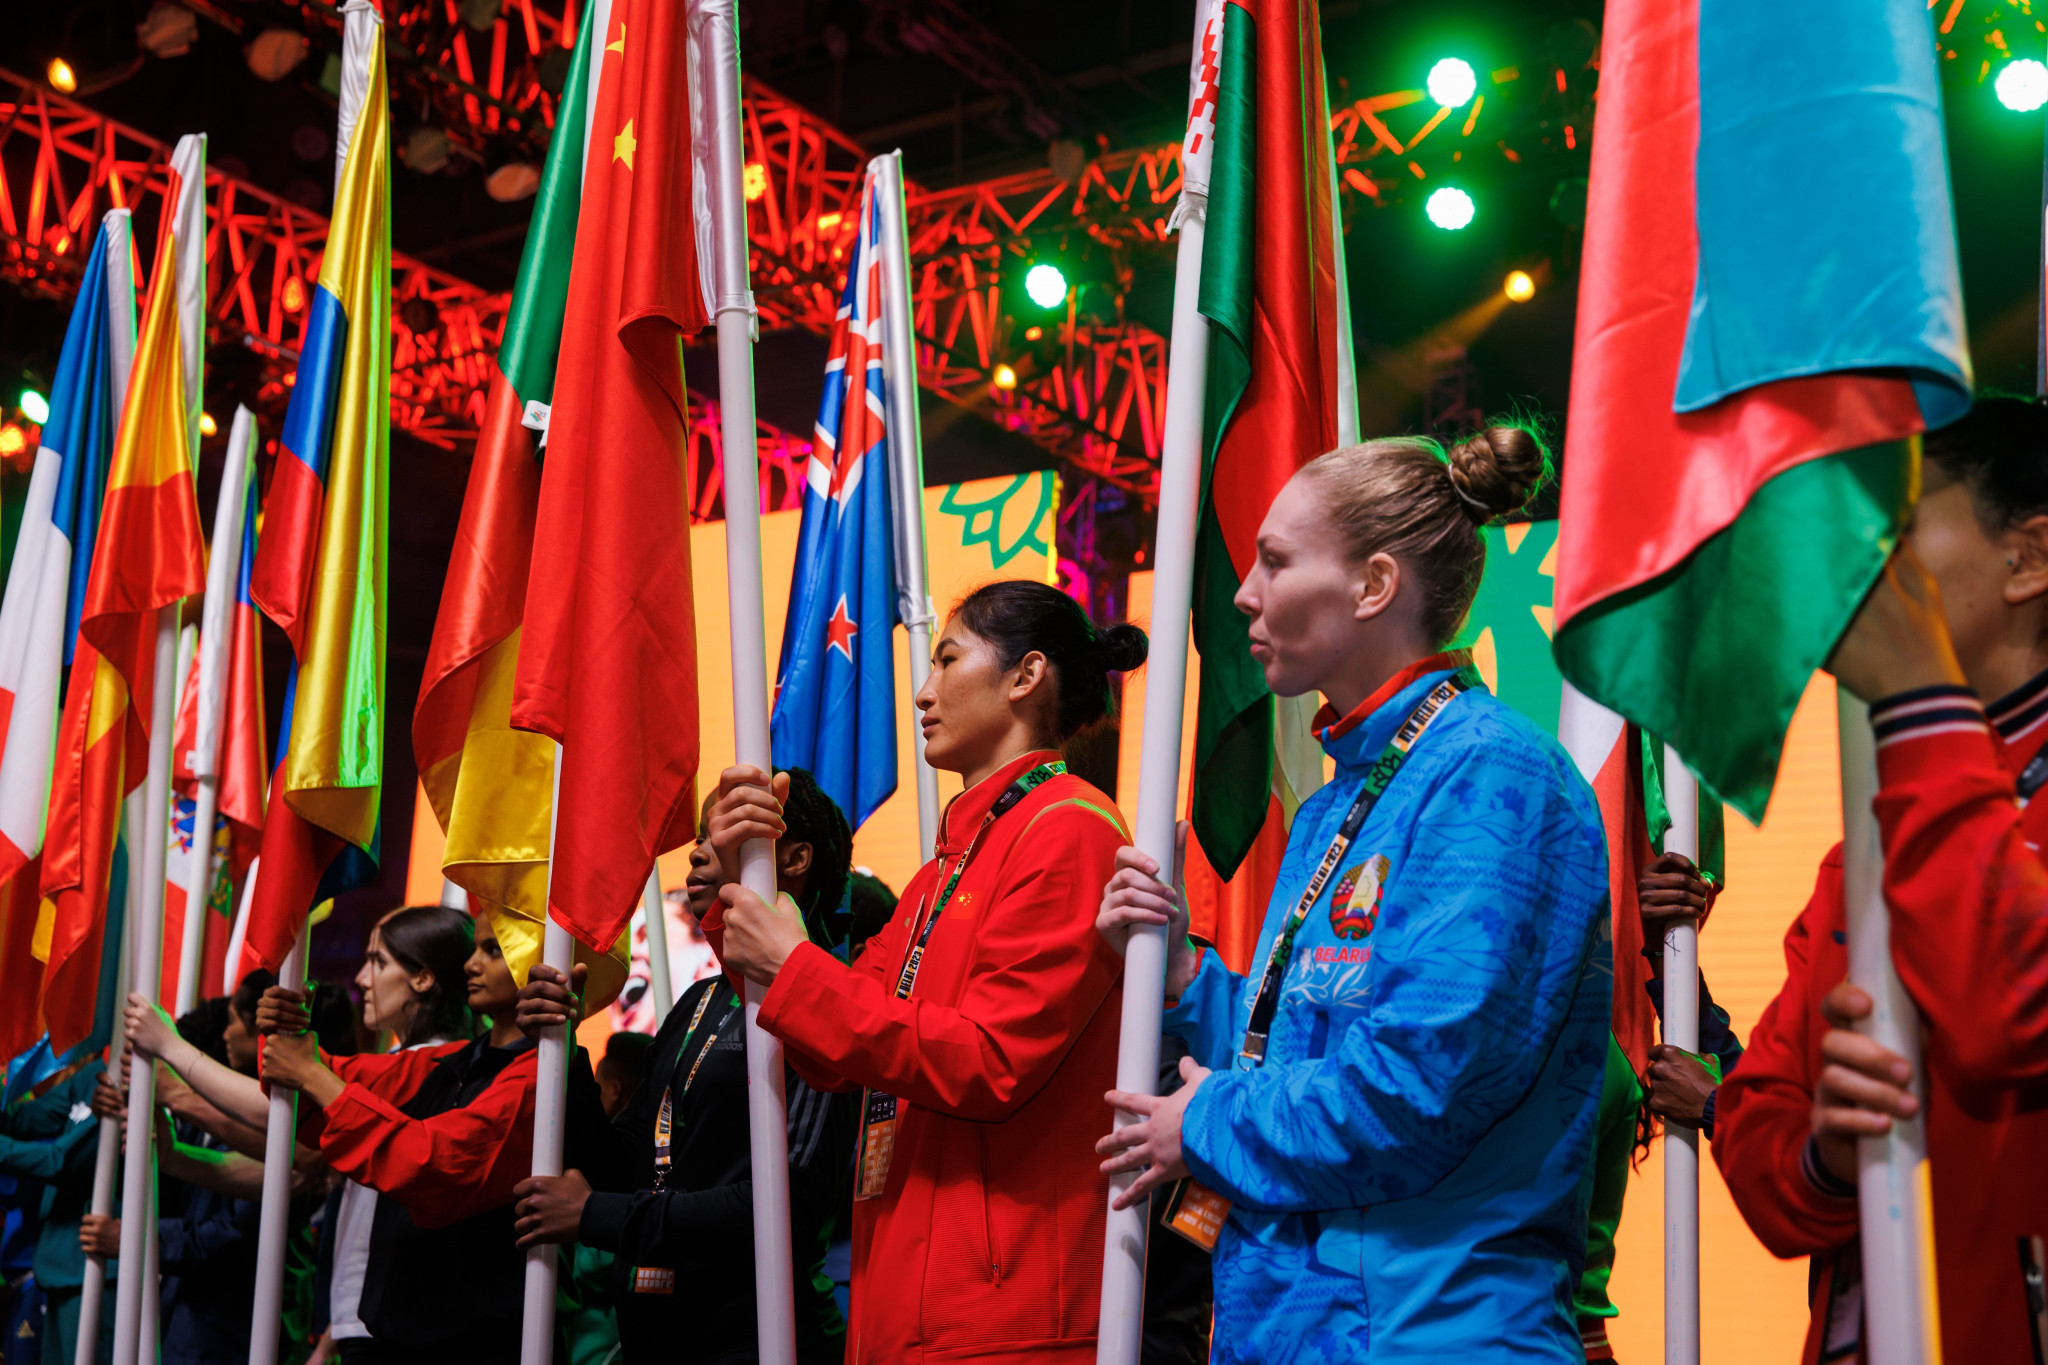 Alina Veber, second from right, carried the Belarus flag as Russian and Belarusian athletes got the chance to wear national symbols after the IBA lifted restrictions ©IBA